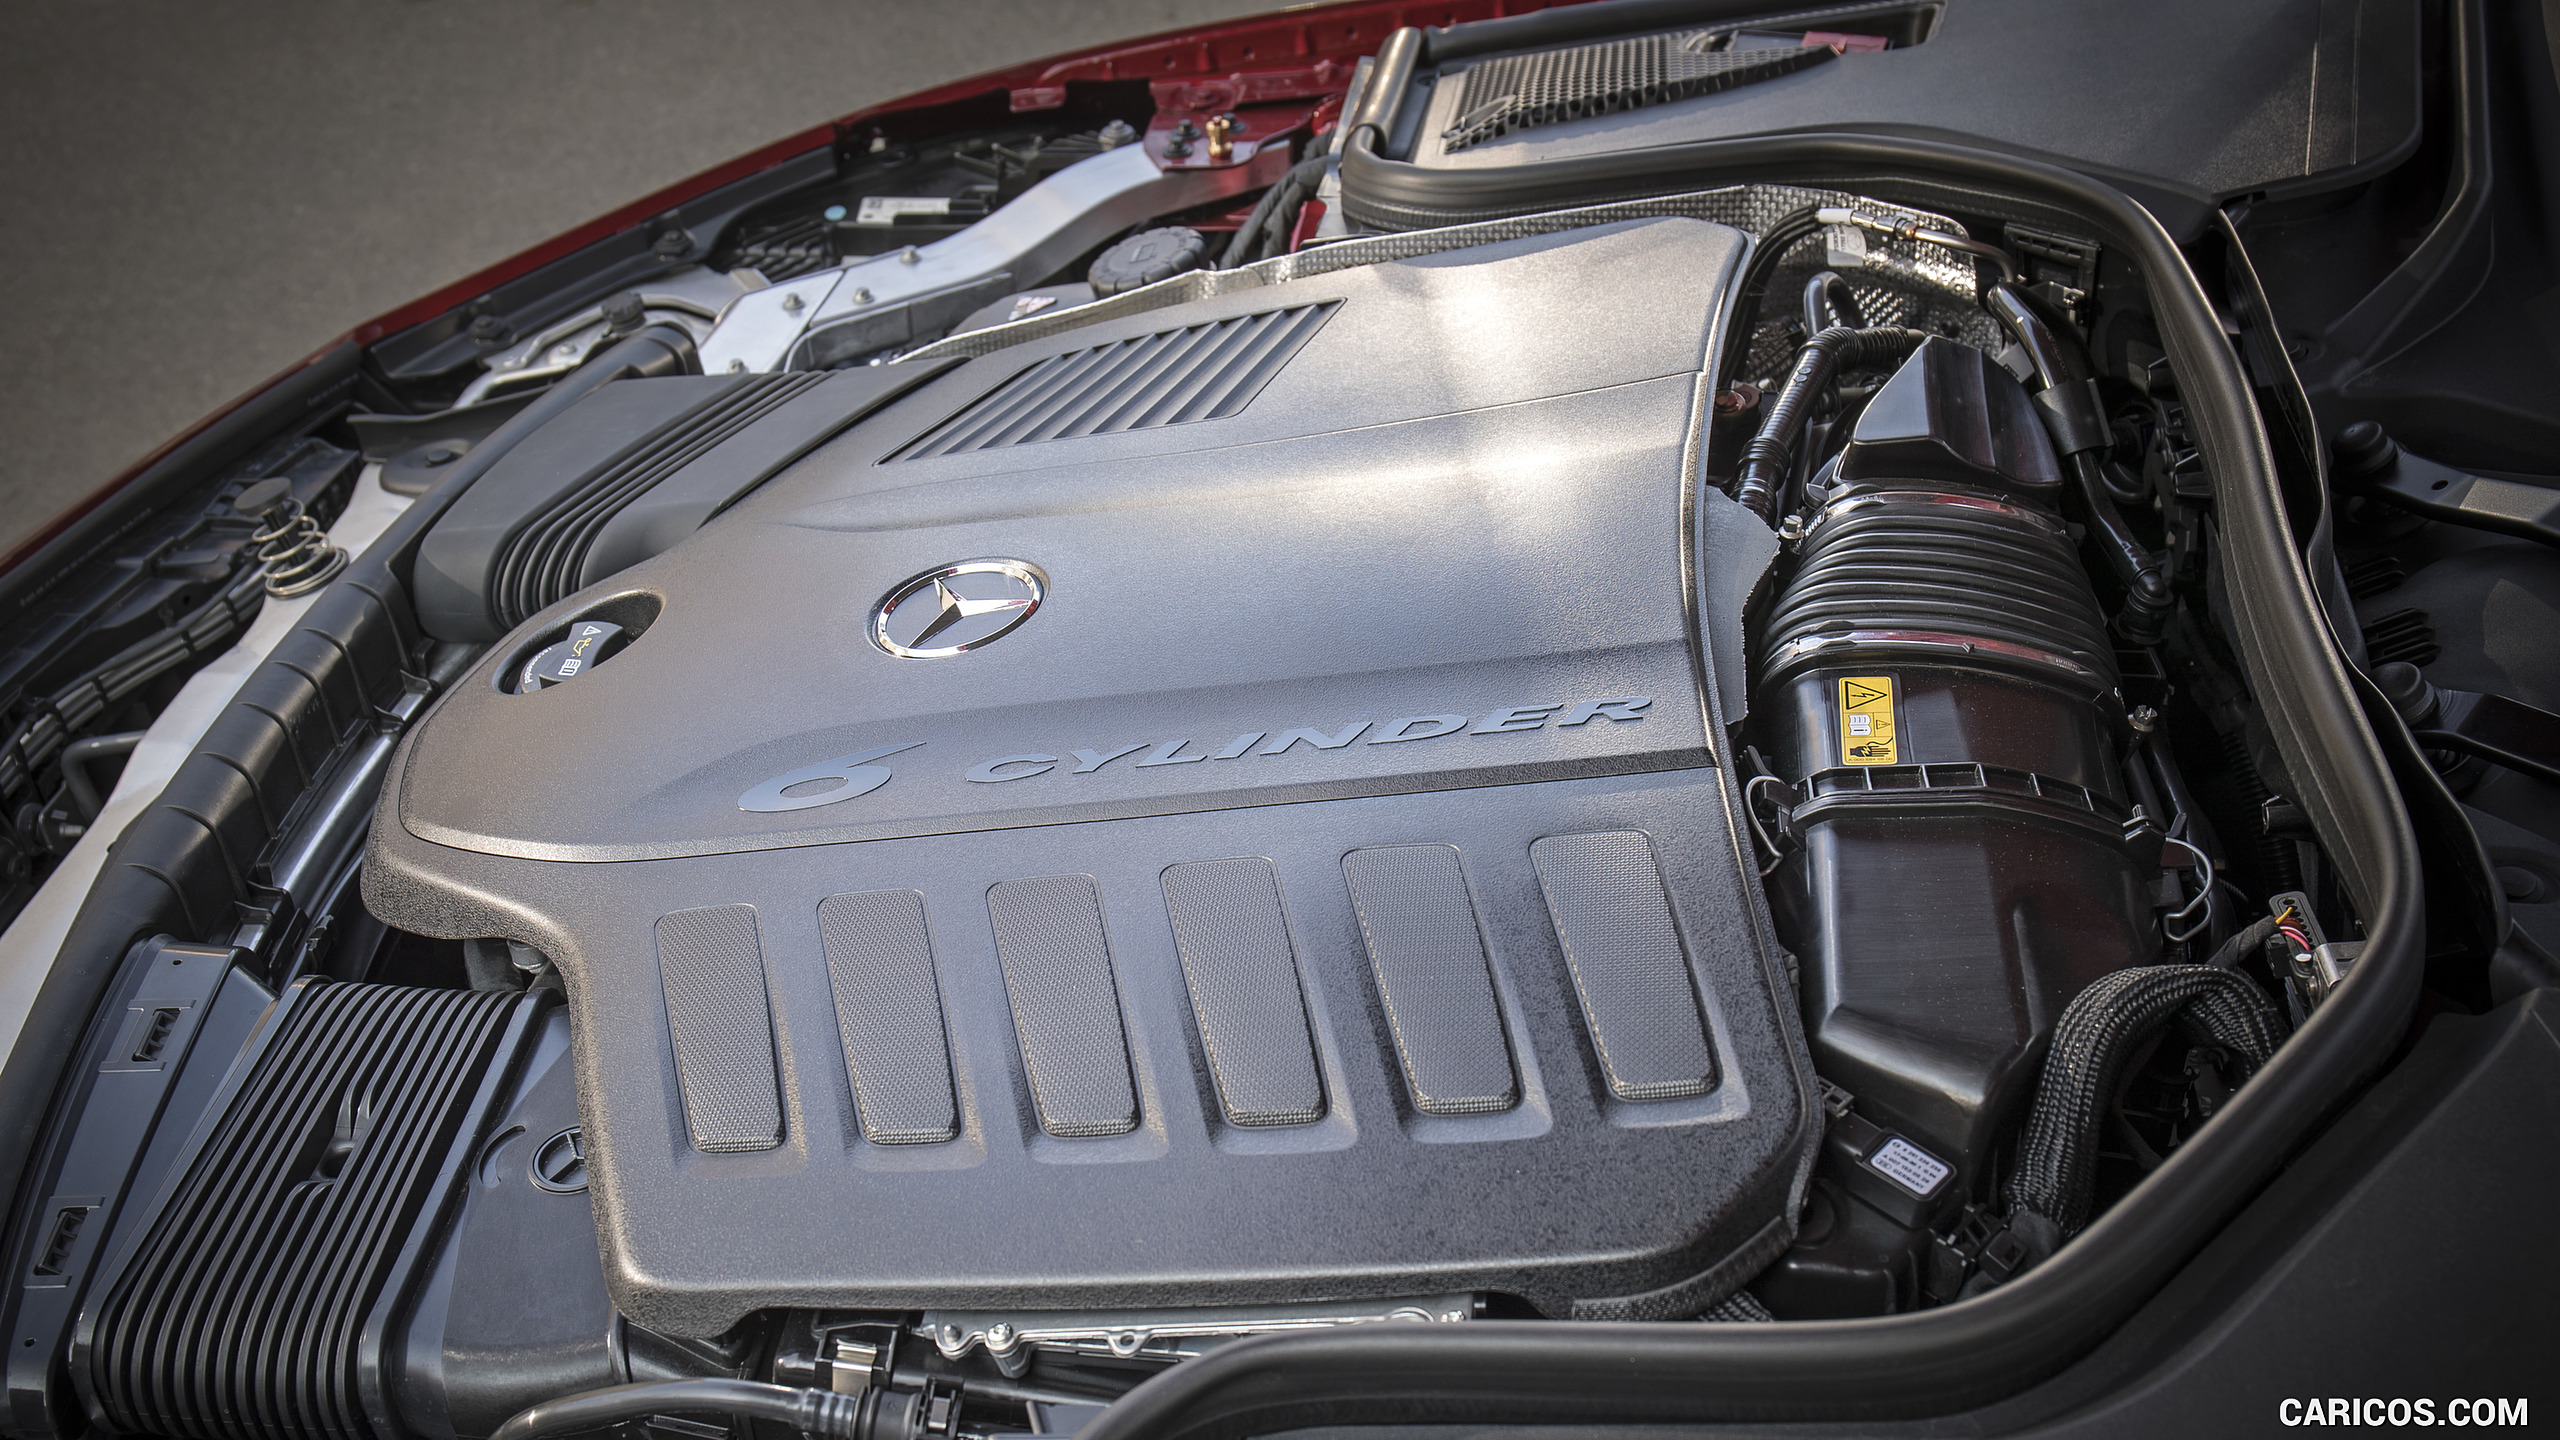 2019 Mercedes-Benz CLS 450 4MATIC - Engine, #92 of 231